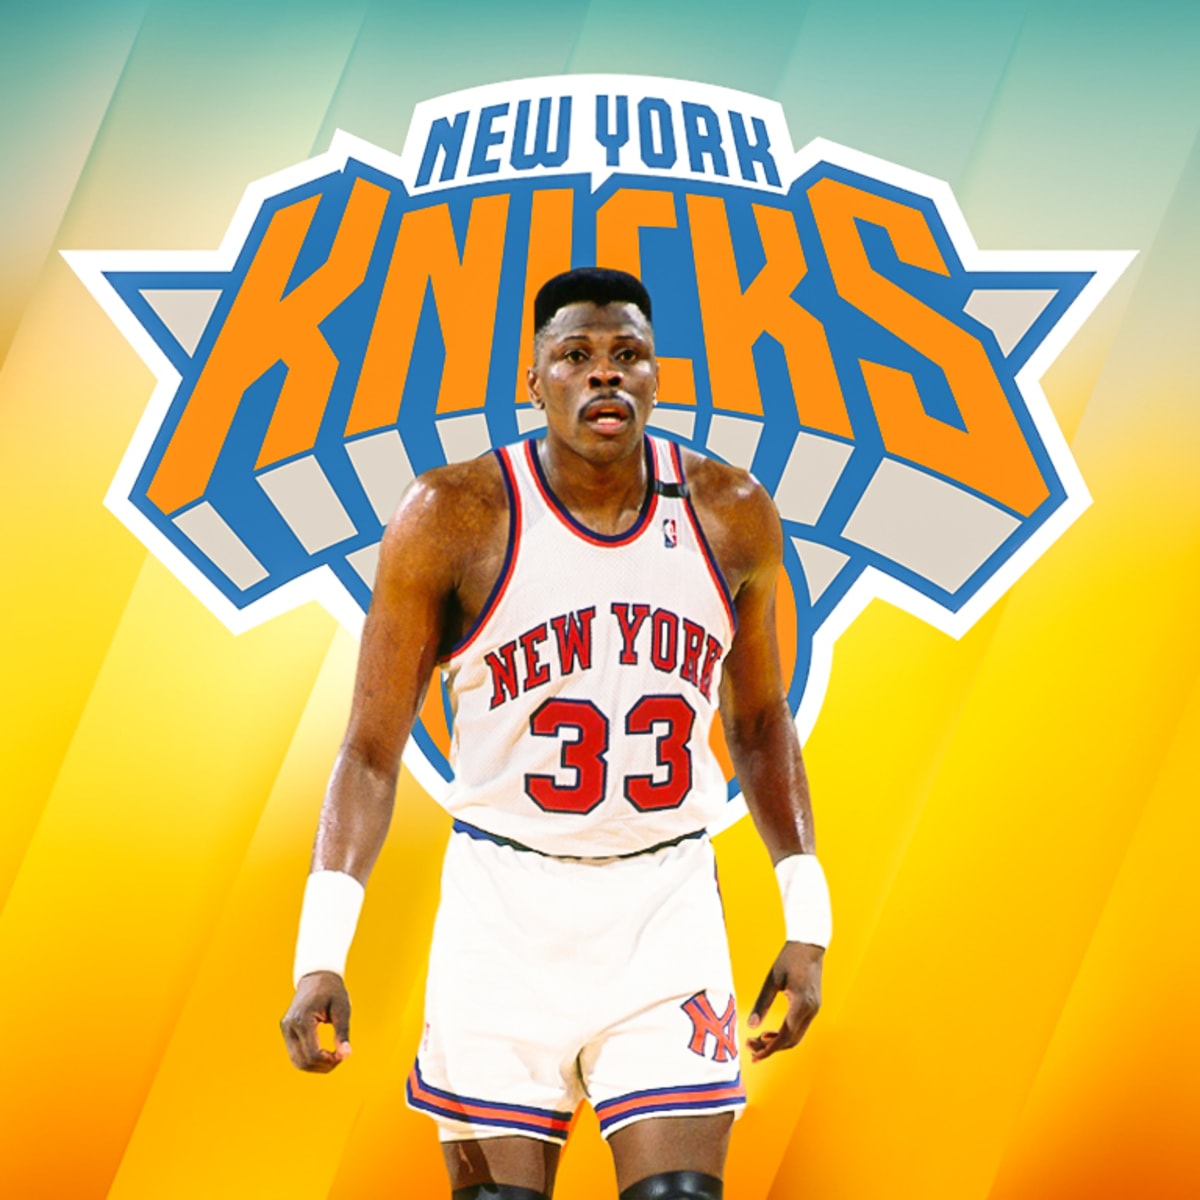 New York Knicks Patrick Ewing sits dejectedly on the bench in the